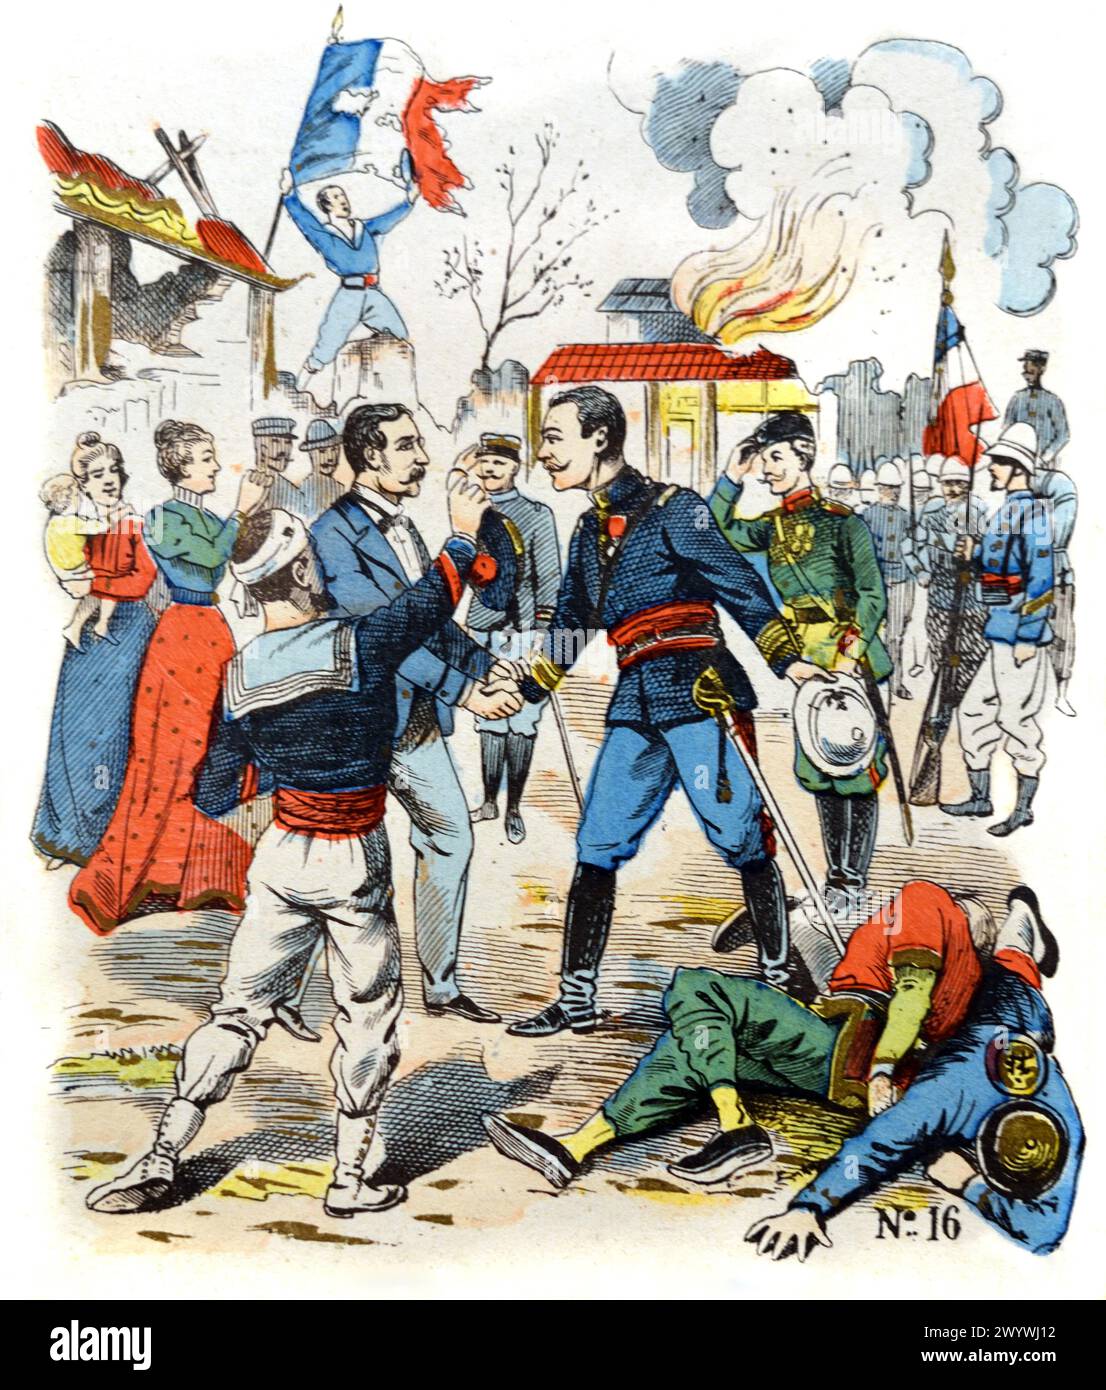 Retaking, Capture or Recapture of Peking China on 14 August 1900 by French Army or French Forces during the Boxer Rebellion aka the Boxer Uprising, Boxer Insurrection, Boxer Movement, Boxer Insurrection or Yihetuan Movement Peking China (1899-1901). Vintage or Historic Coloured Engraving or Illustration, early c20th. Stock Photo